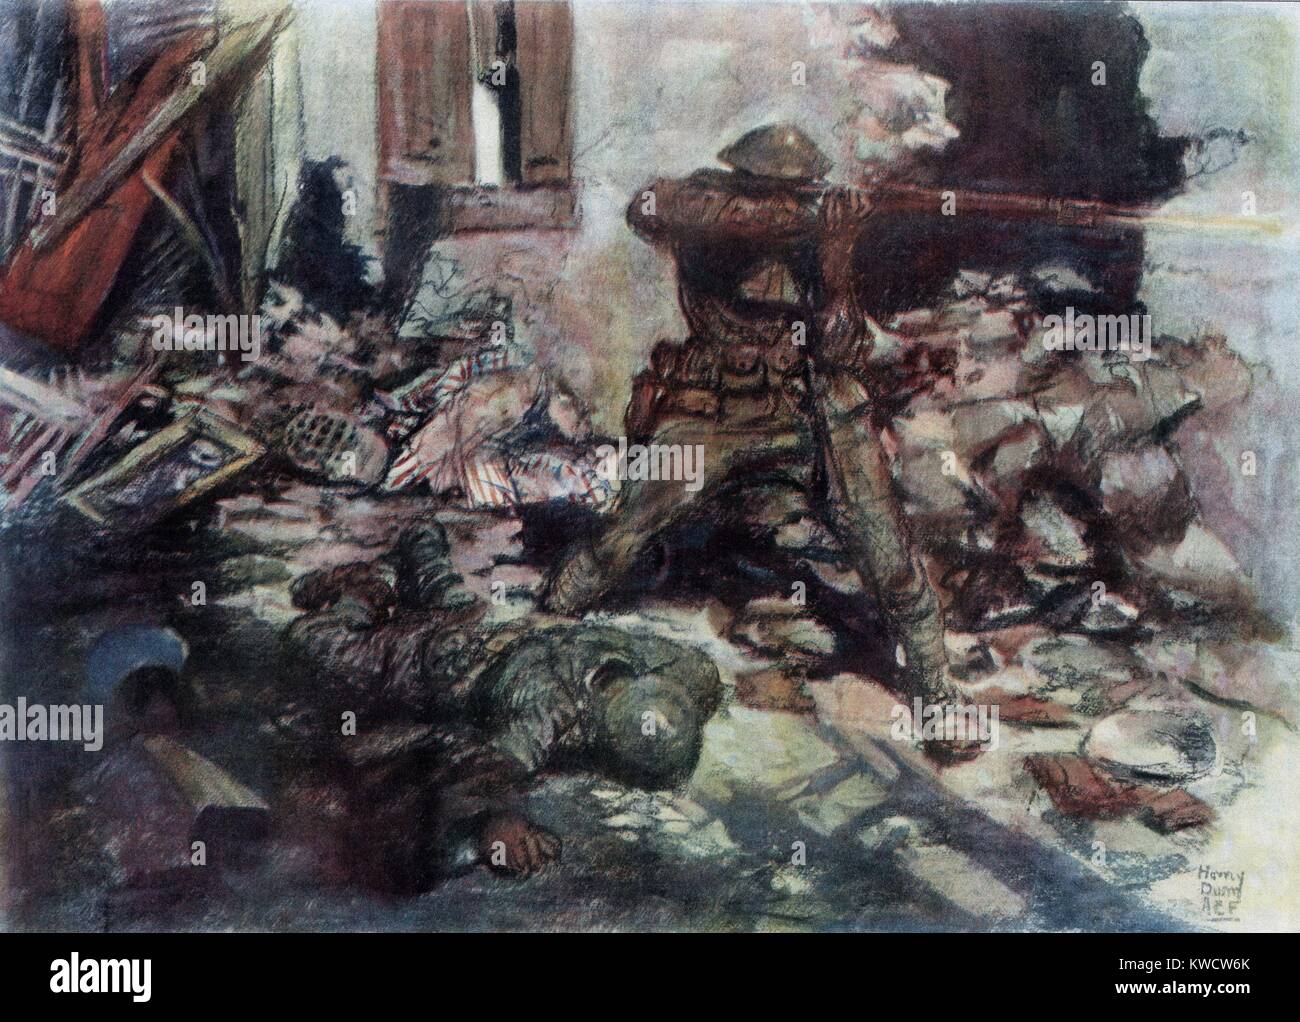 World War 1: Second Battle of the Marne. Drawing of an U.S. soldier in street fighting in a village along the Marne River. Ca. July 15 -Aug. 2, 1918. Painting by AEF Captain Harvey Dunn. (BSLOC 2013 1 190) Stock Photo